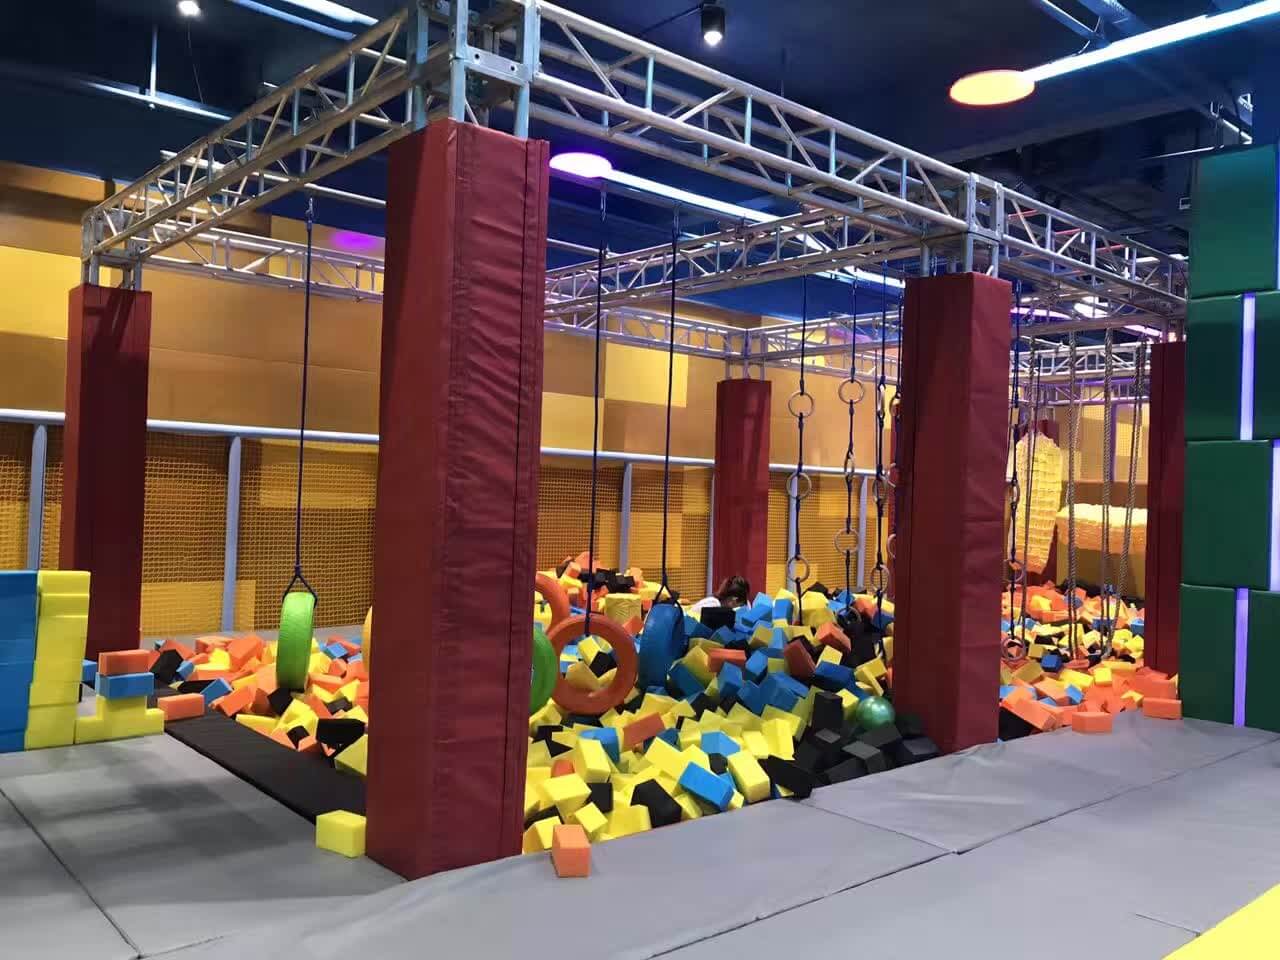 What is the most popular indoor playground equipment?